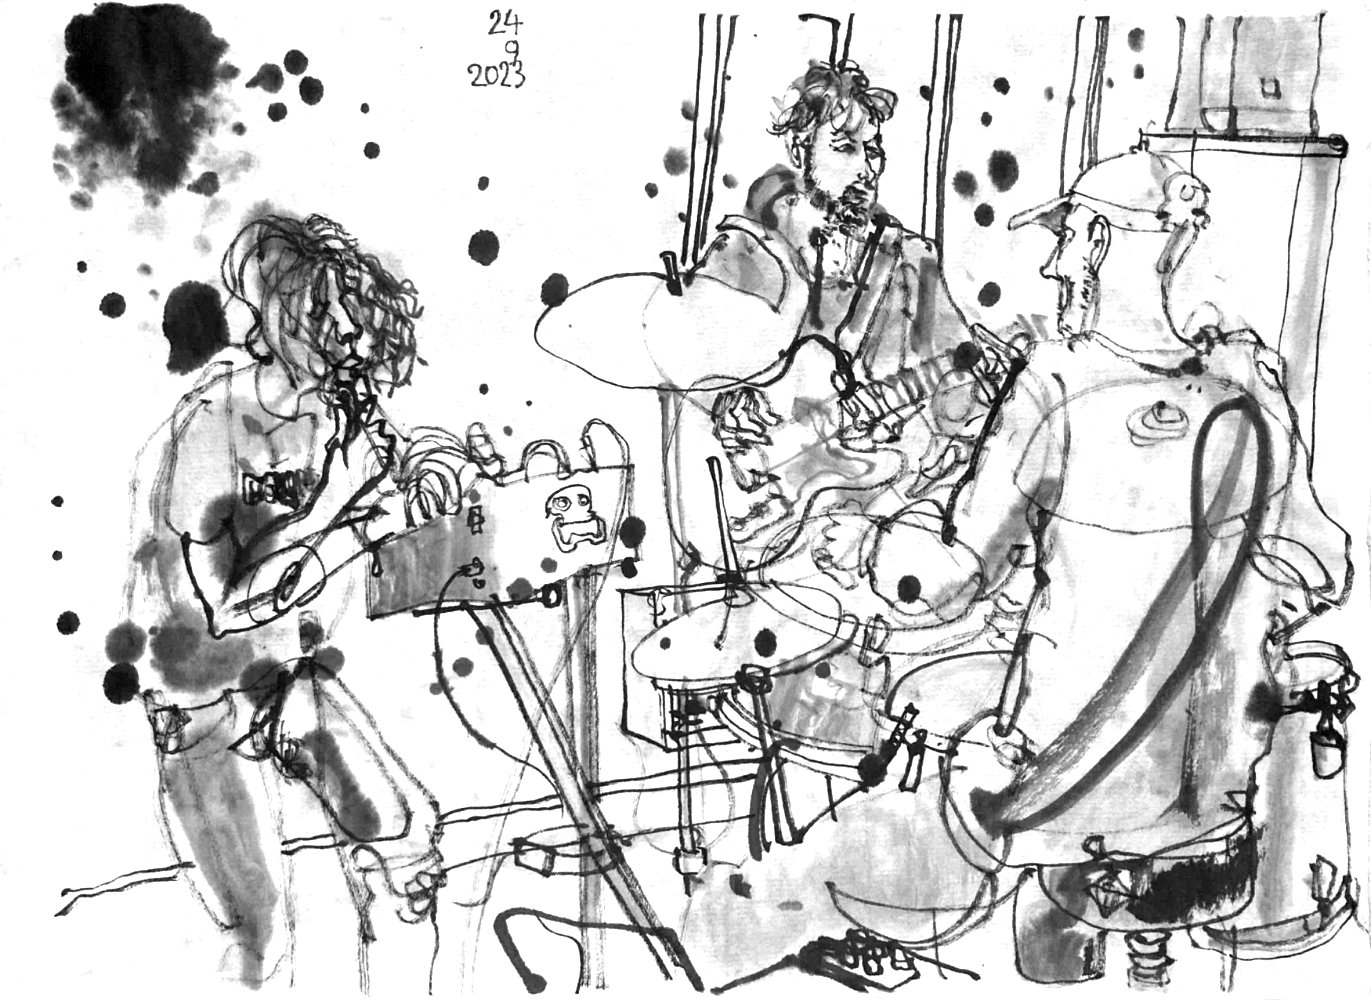 Ink drawing of three musicians